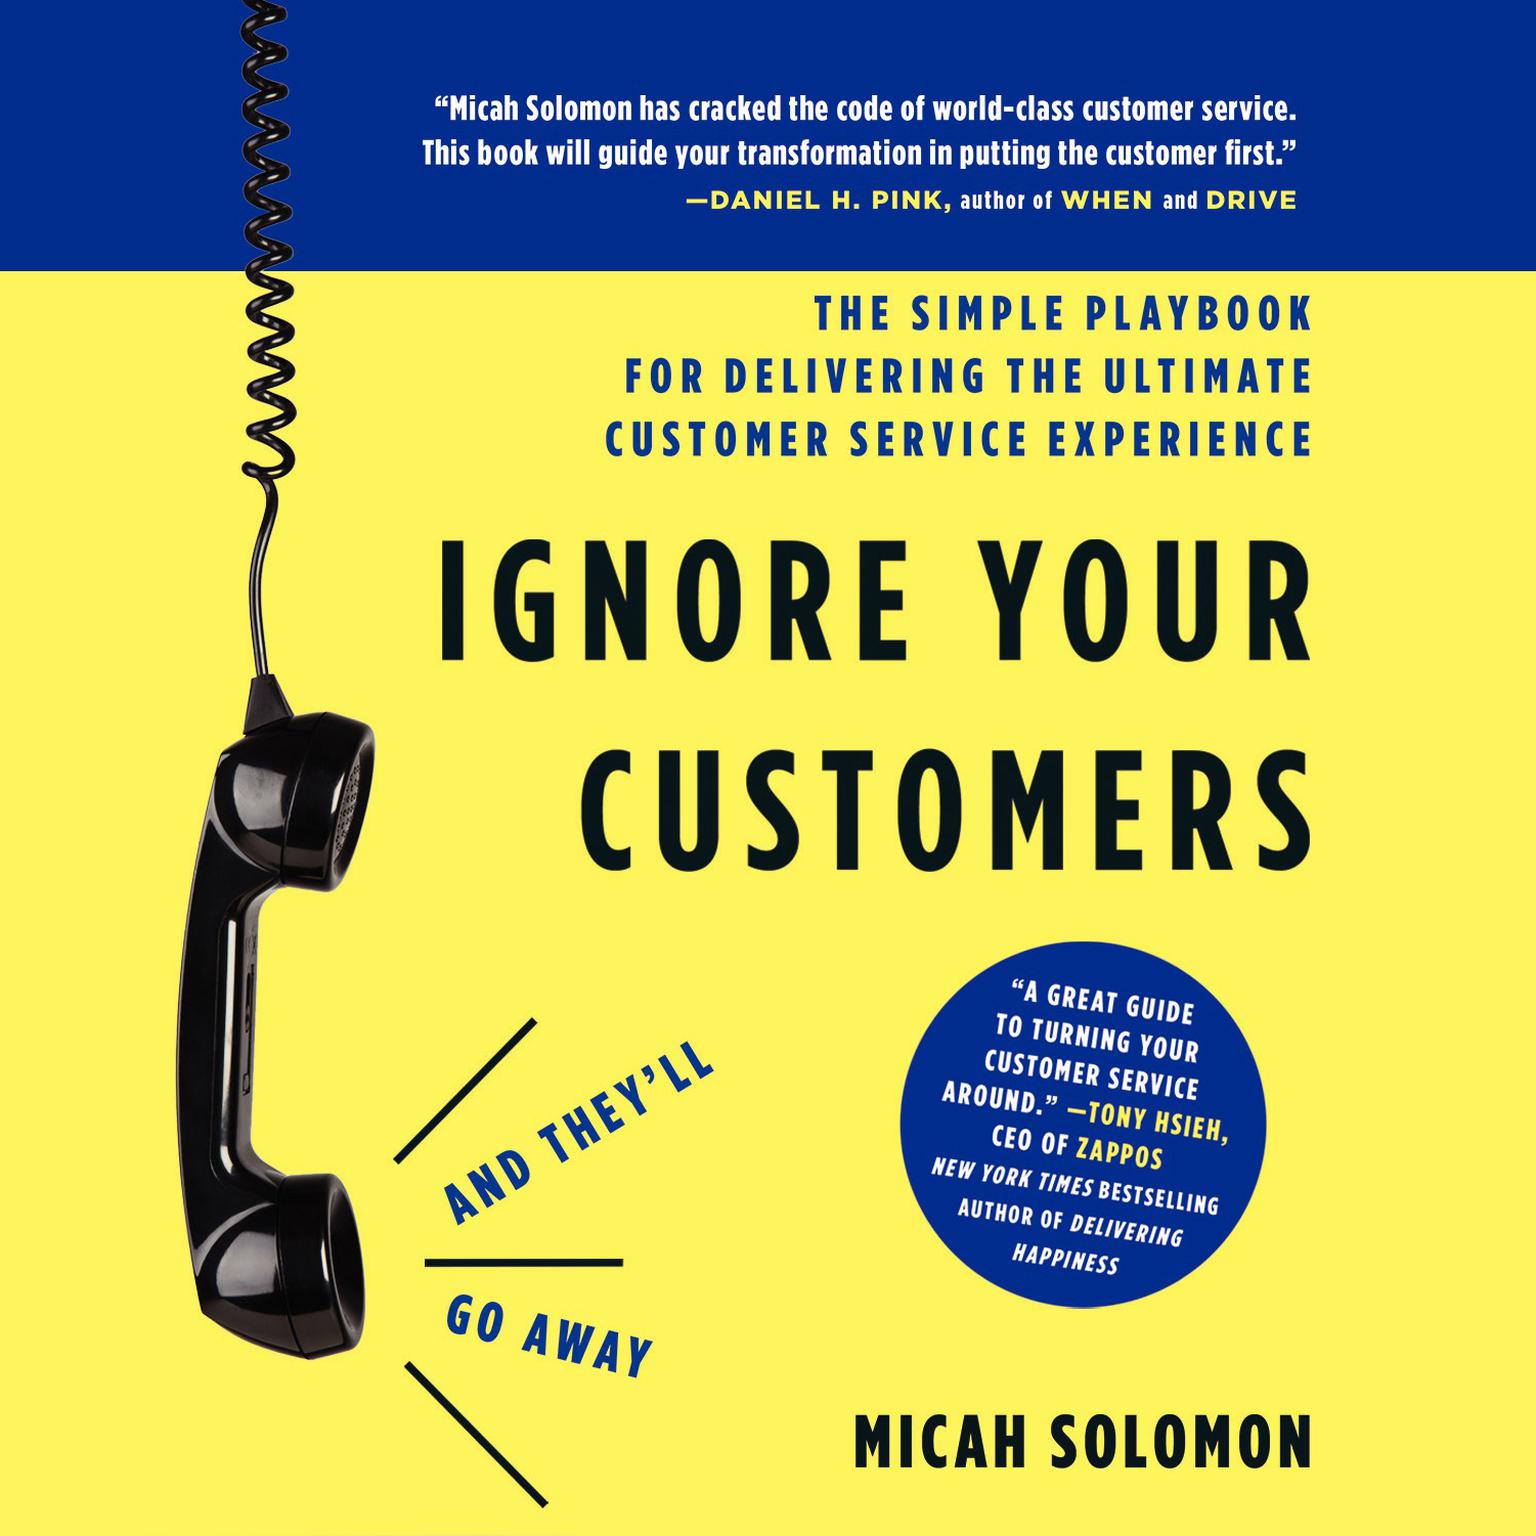 Ignore Your Customers (and They’ll Go Away): The Simple Playbook for Delivering the Ultimate Customer Service Experience Audiobook, by Micah Solomon